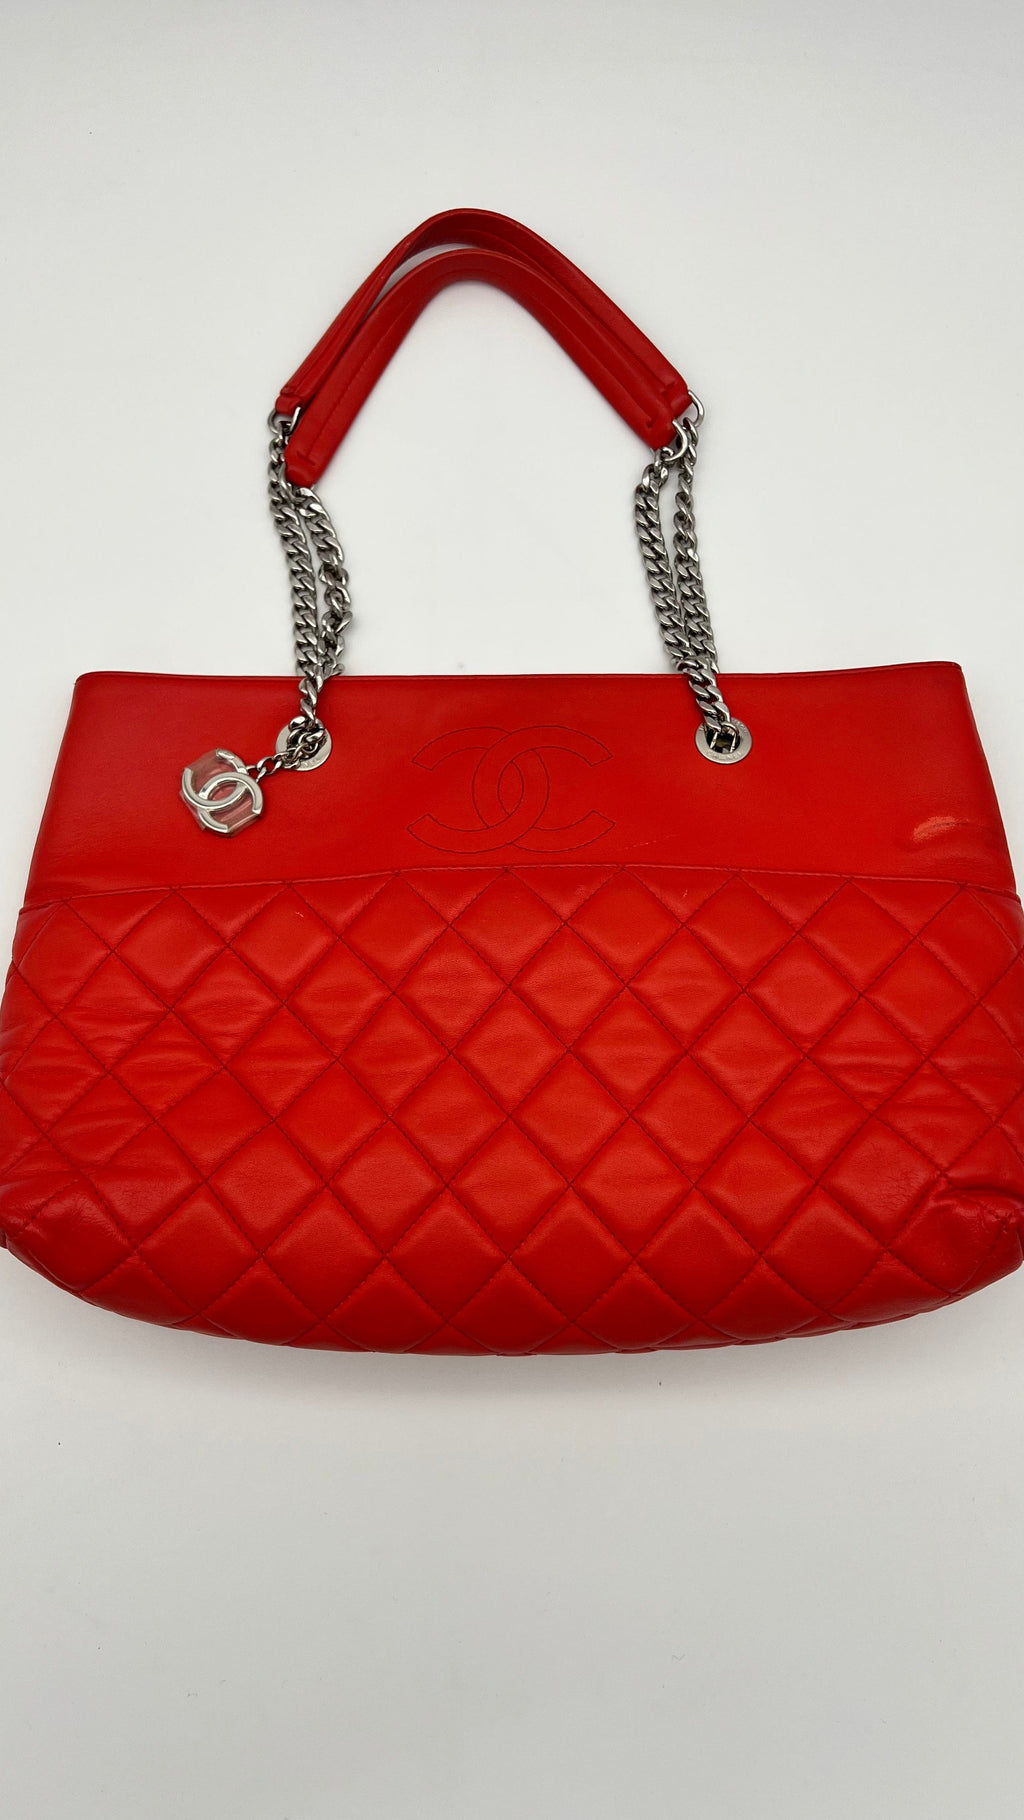 Chanel Chain Tote Bag canvas red x white – LuxuryPromise